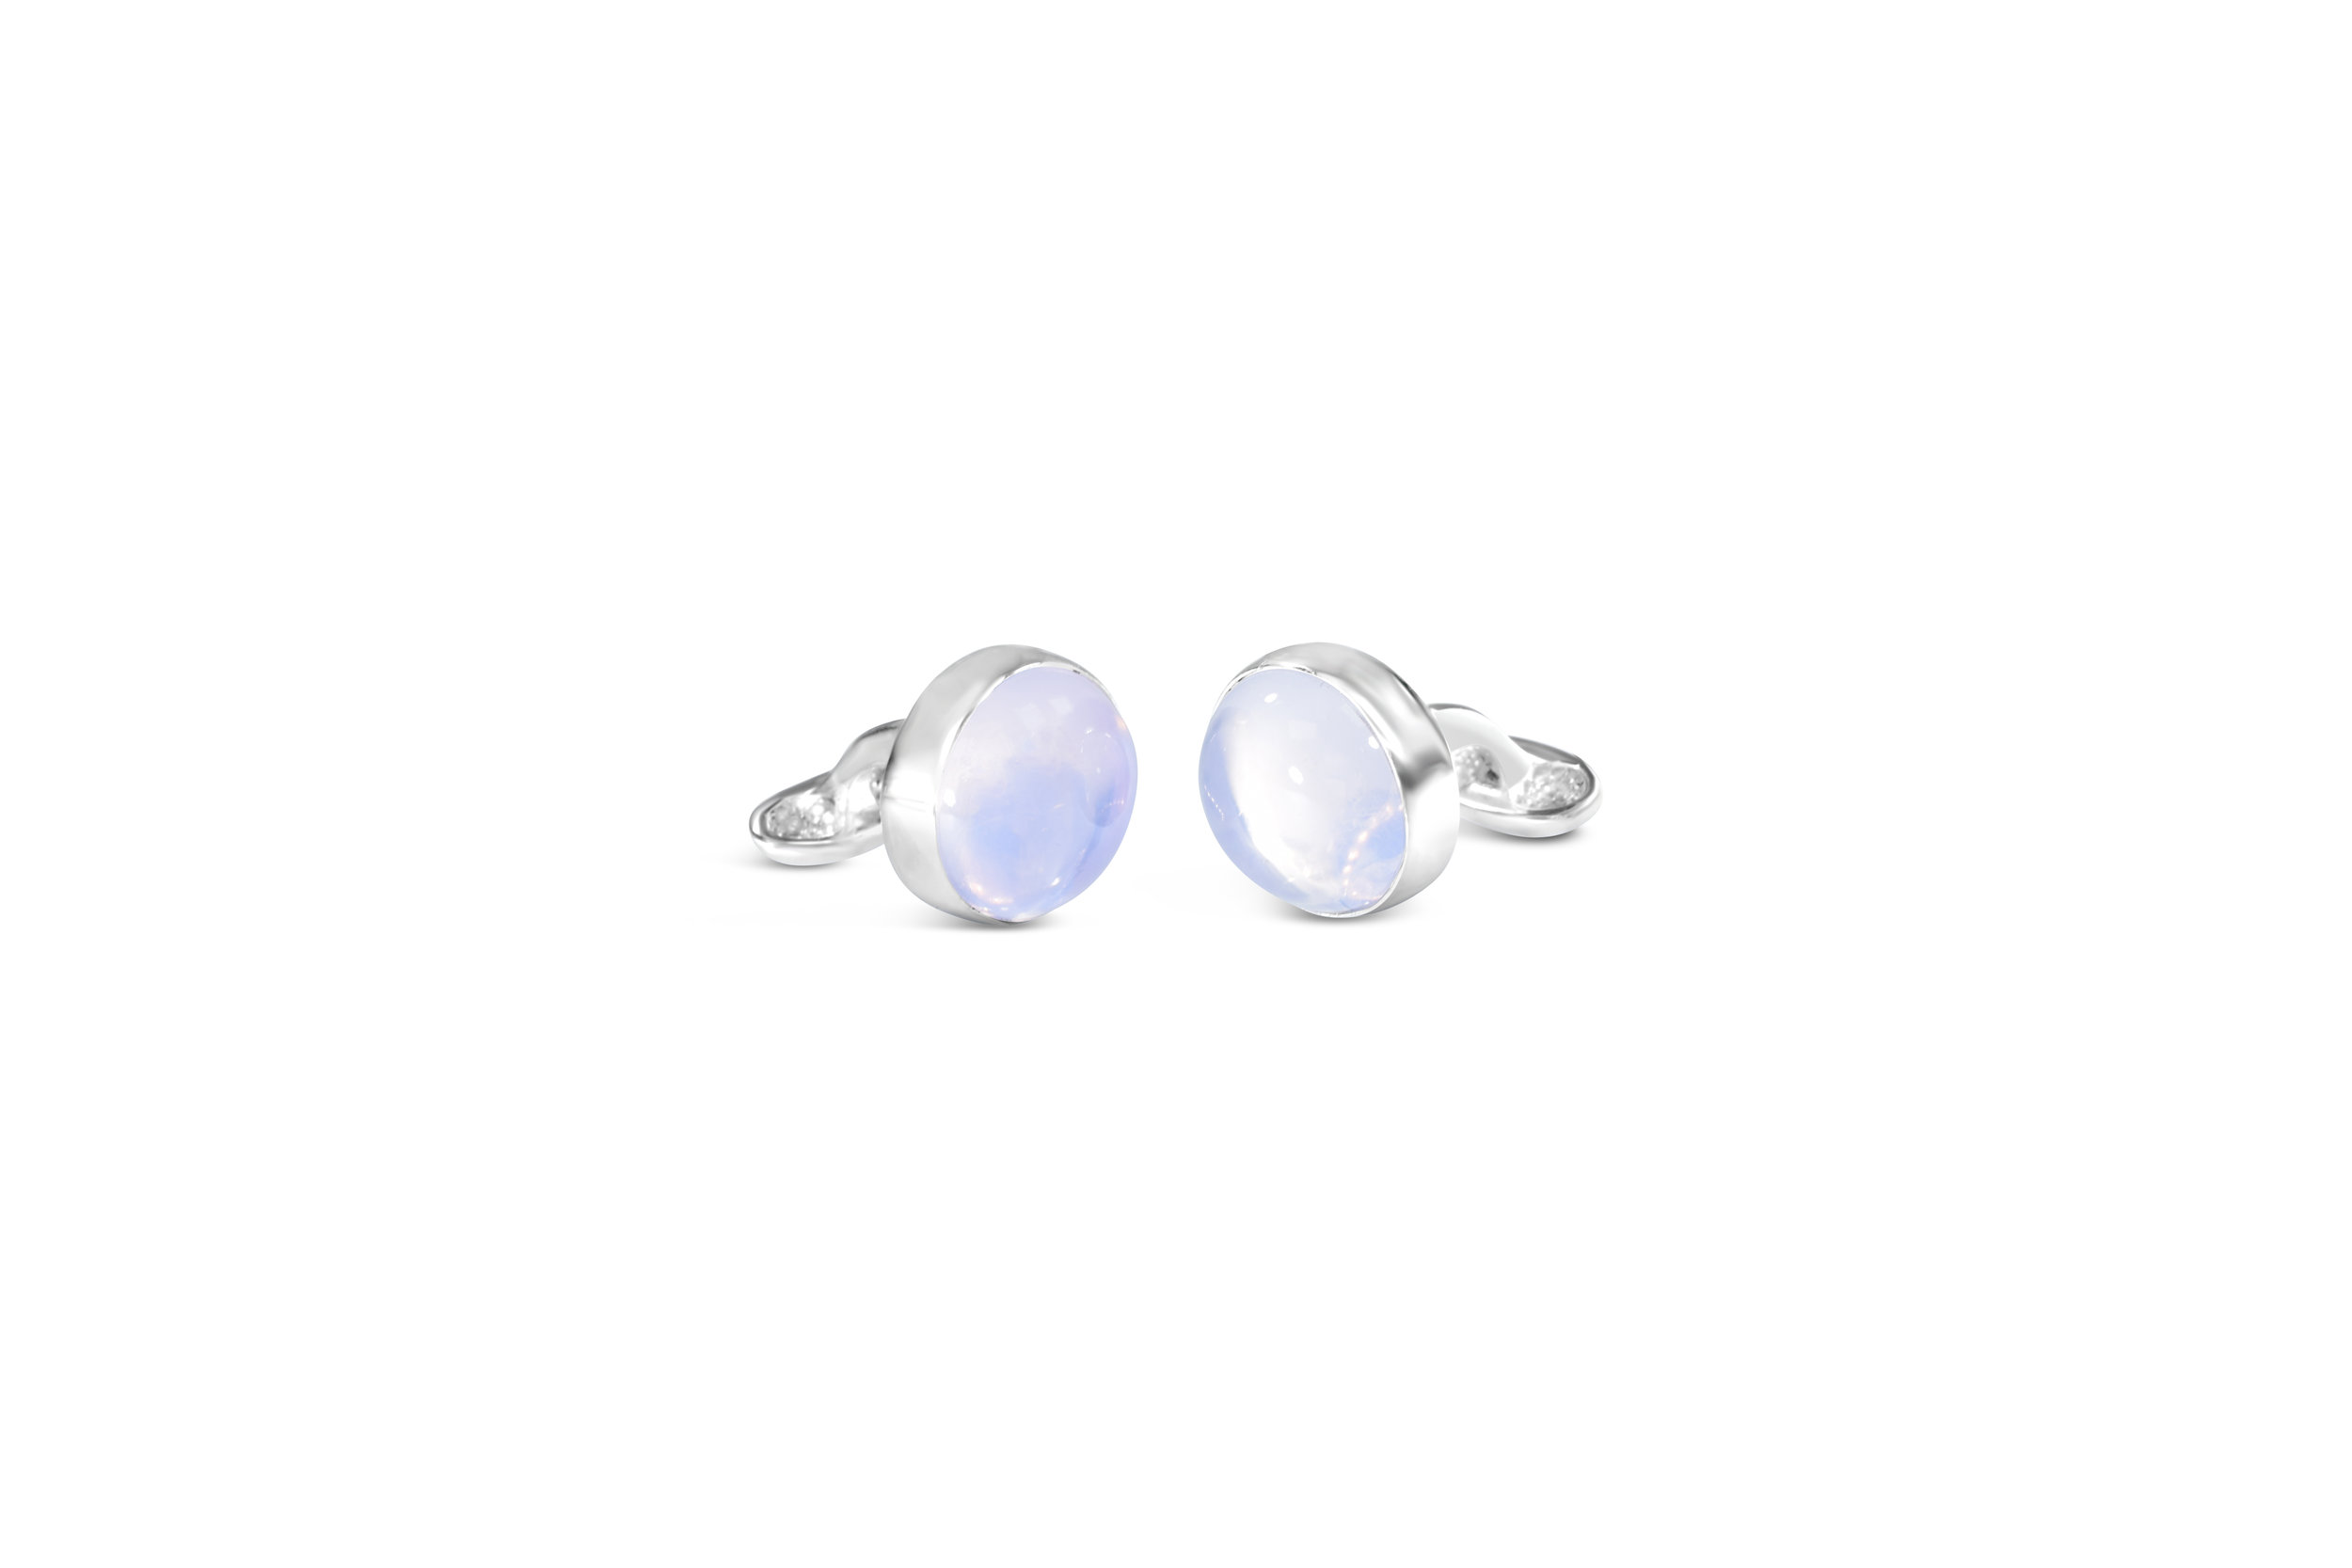 mens cufflinks made of sterling silver and lavender moonstone 